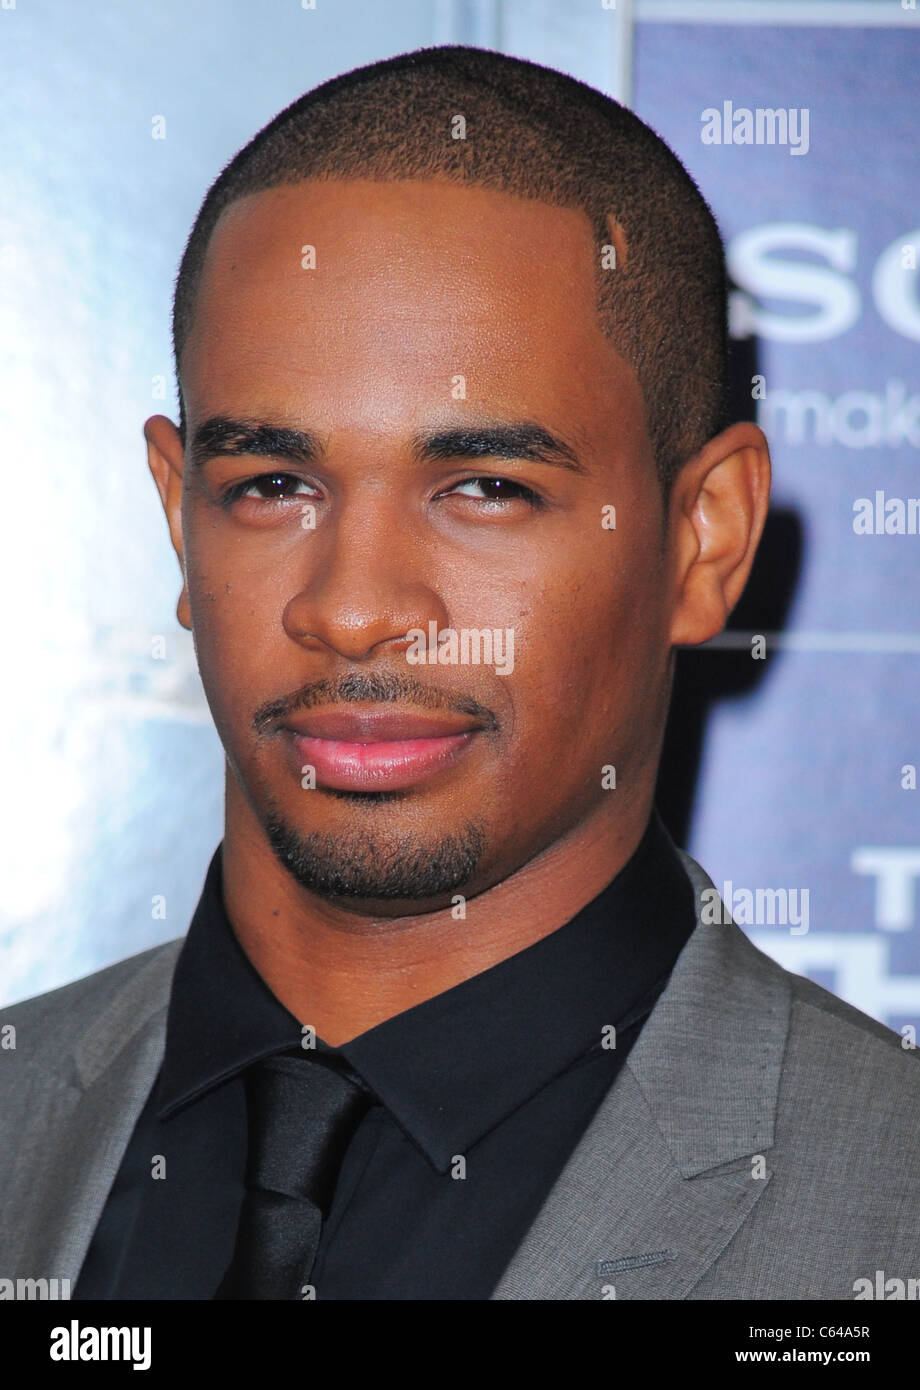 Damon Wayans Jr. at arrivals for THE OTHER GUYS Premiere, The Ziegfeld Theatre, New York, NY August 2, 2010. Photo By: Gregorio Stock Photo